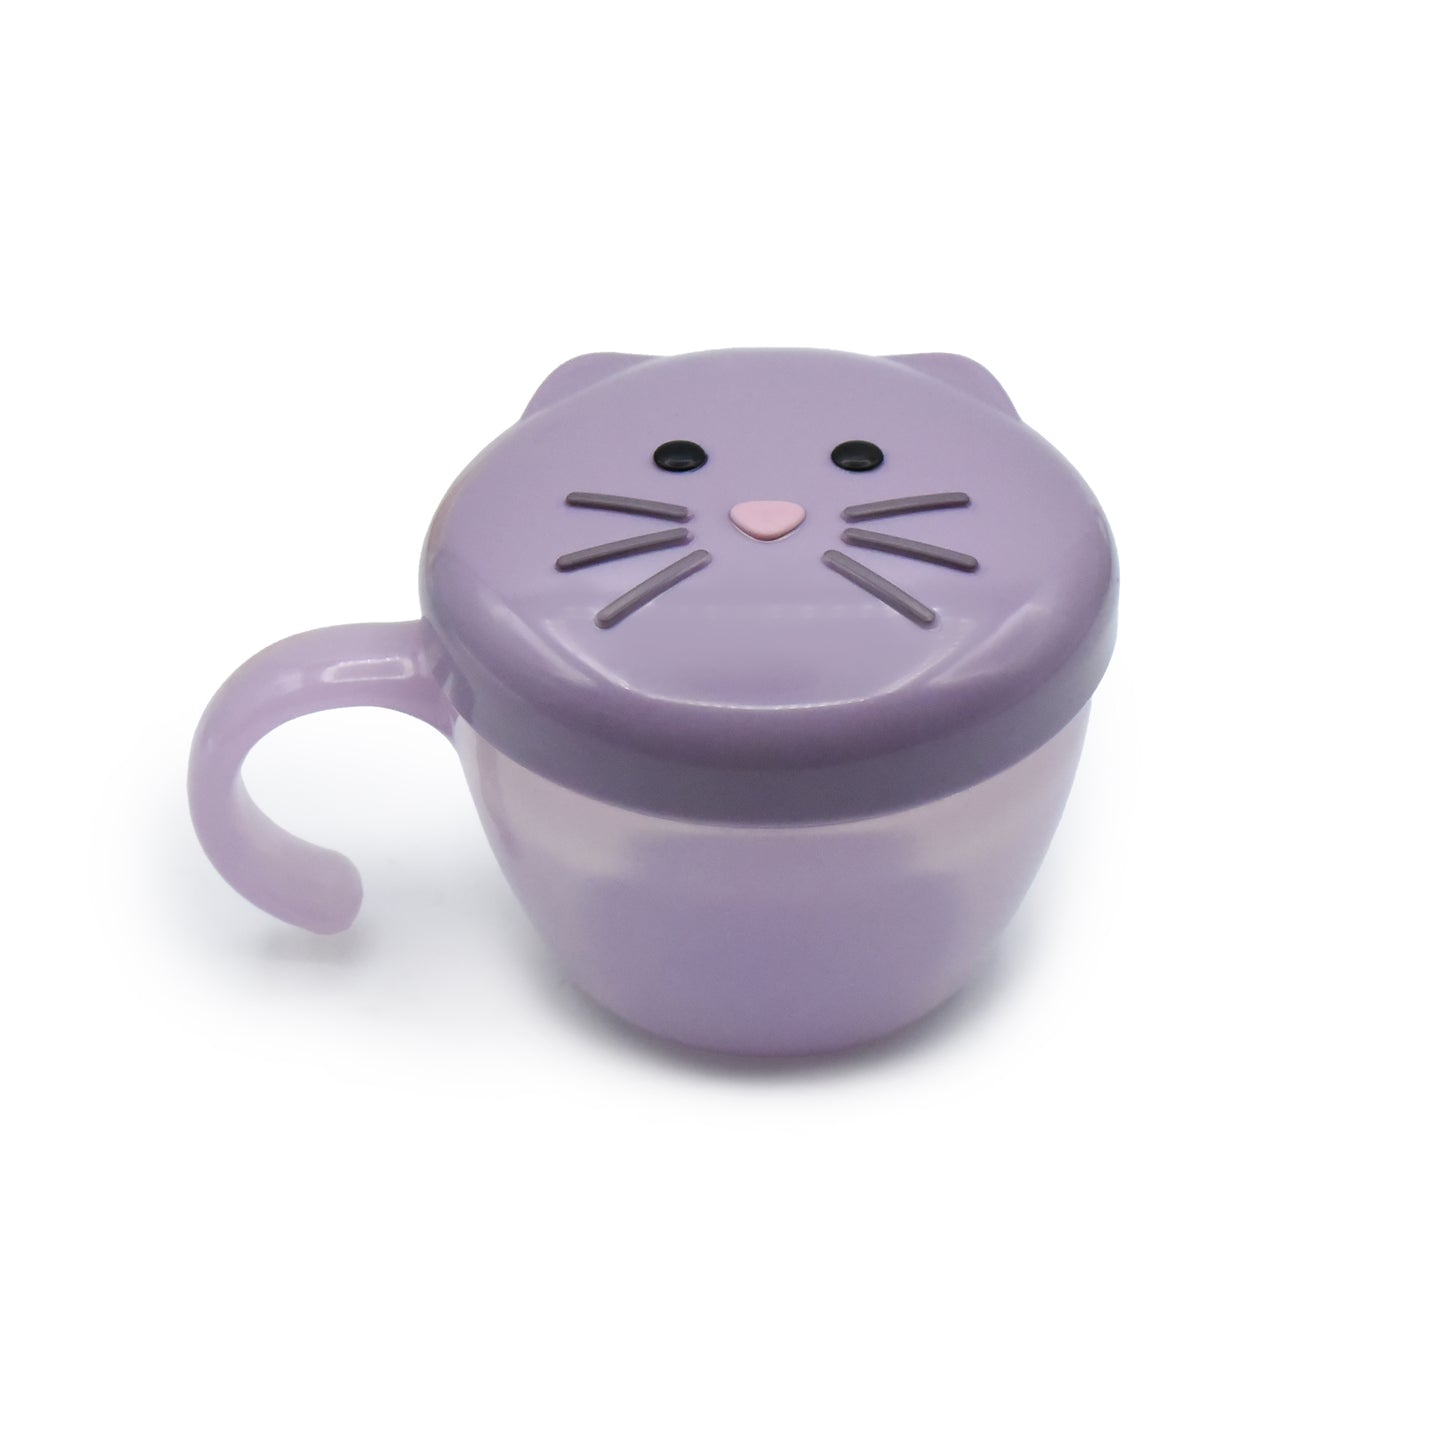 melii Snack Container for Kids - Purple Cat Design Mess Free, Adaptable, and Easy to Hold with Removable Finger Trap - Perfect for Independent Snacking, Travel - BPA Free and Dishwasher Safe